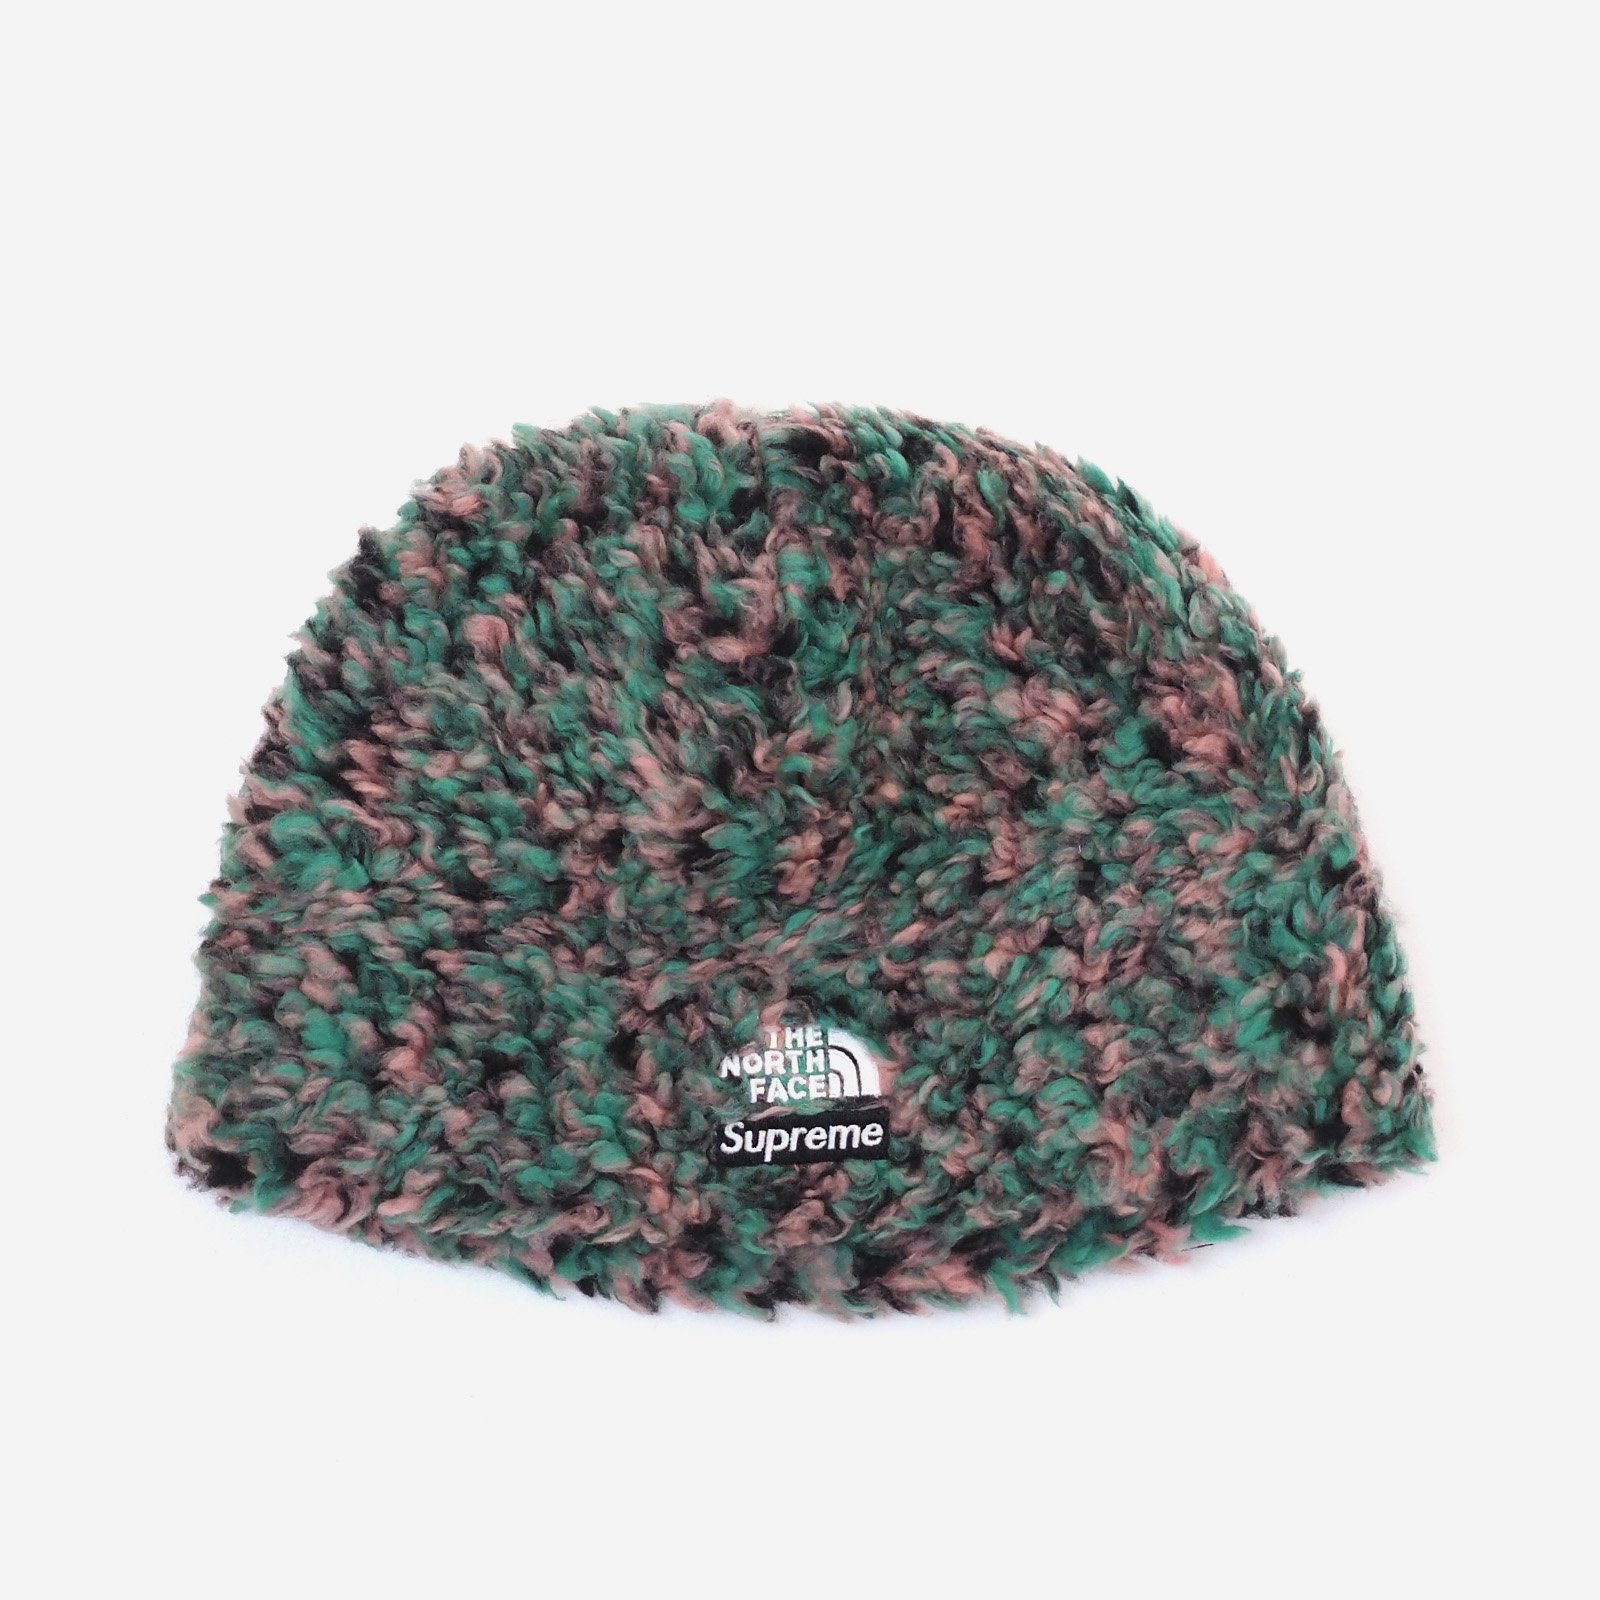 Supreme/The North Face High Pile Fleece Beanie - ParkSIDER